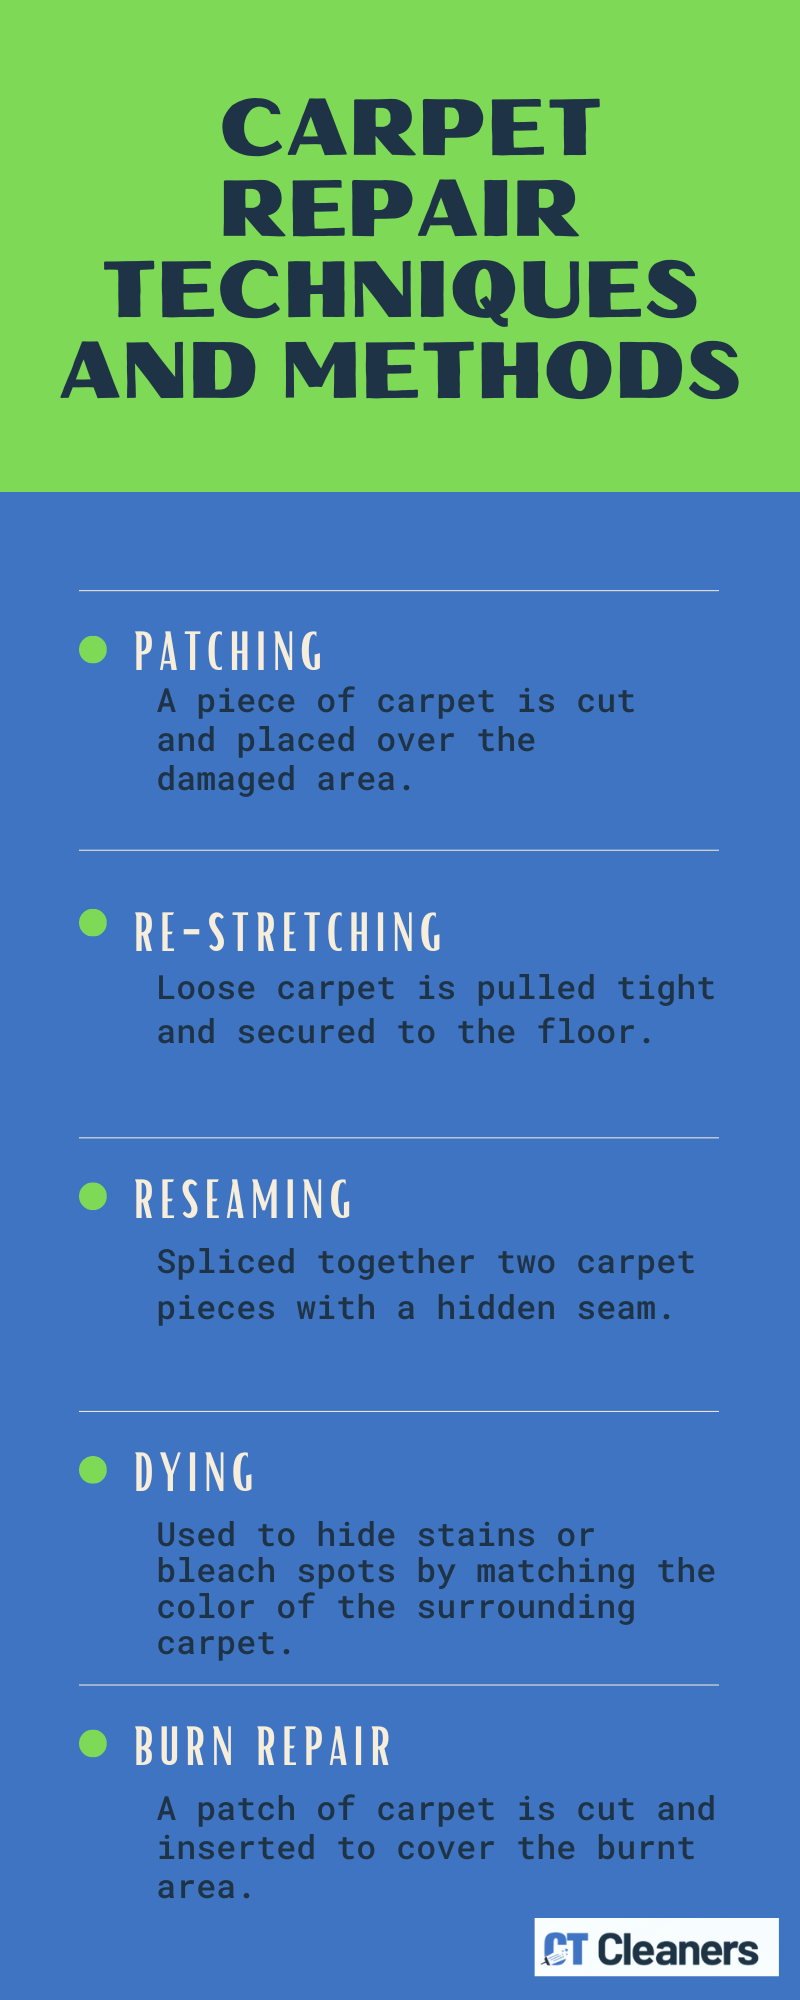 Types of Carpet Damage Repaired